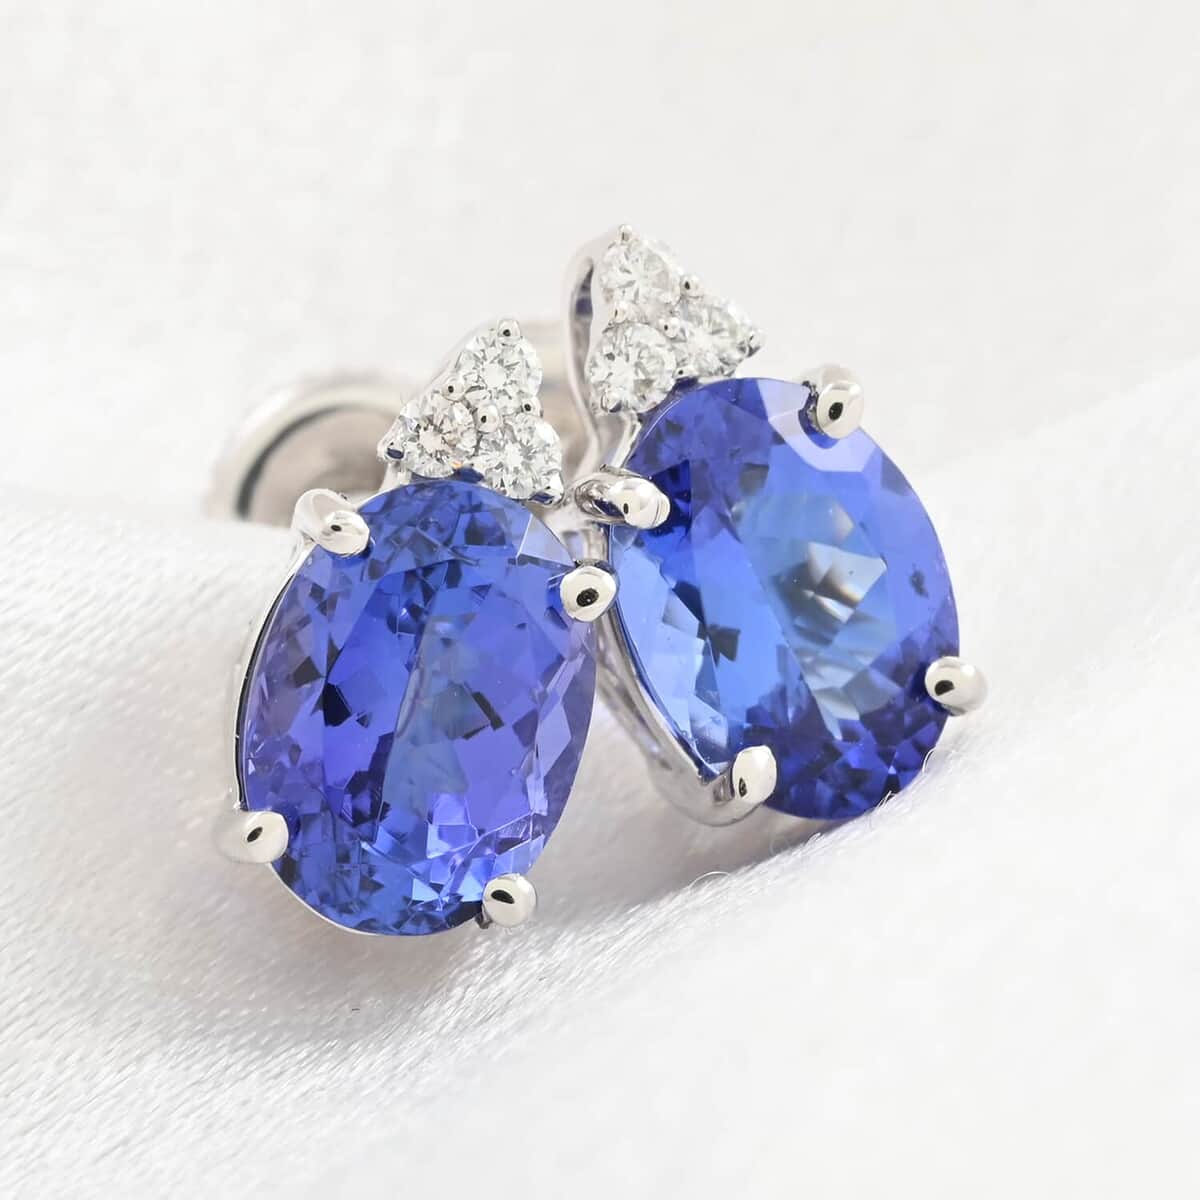 Rhapsody Certified and Appraised AAAA Tanzanite Earrings, E-F VS Diamond Accent Earrings, 950 Platinum Earrings, Tanzanite Gifts For Her  4.15 Grams 3.25 ctw image number 1